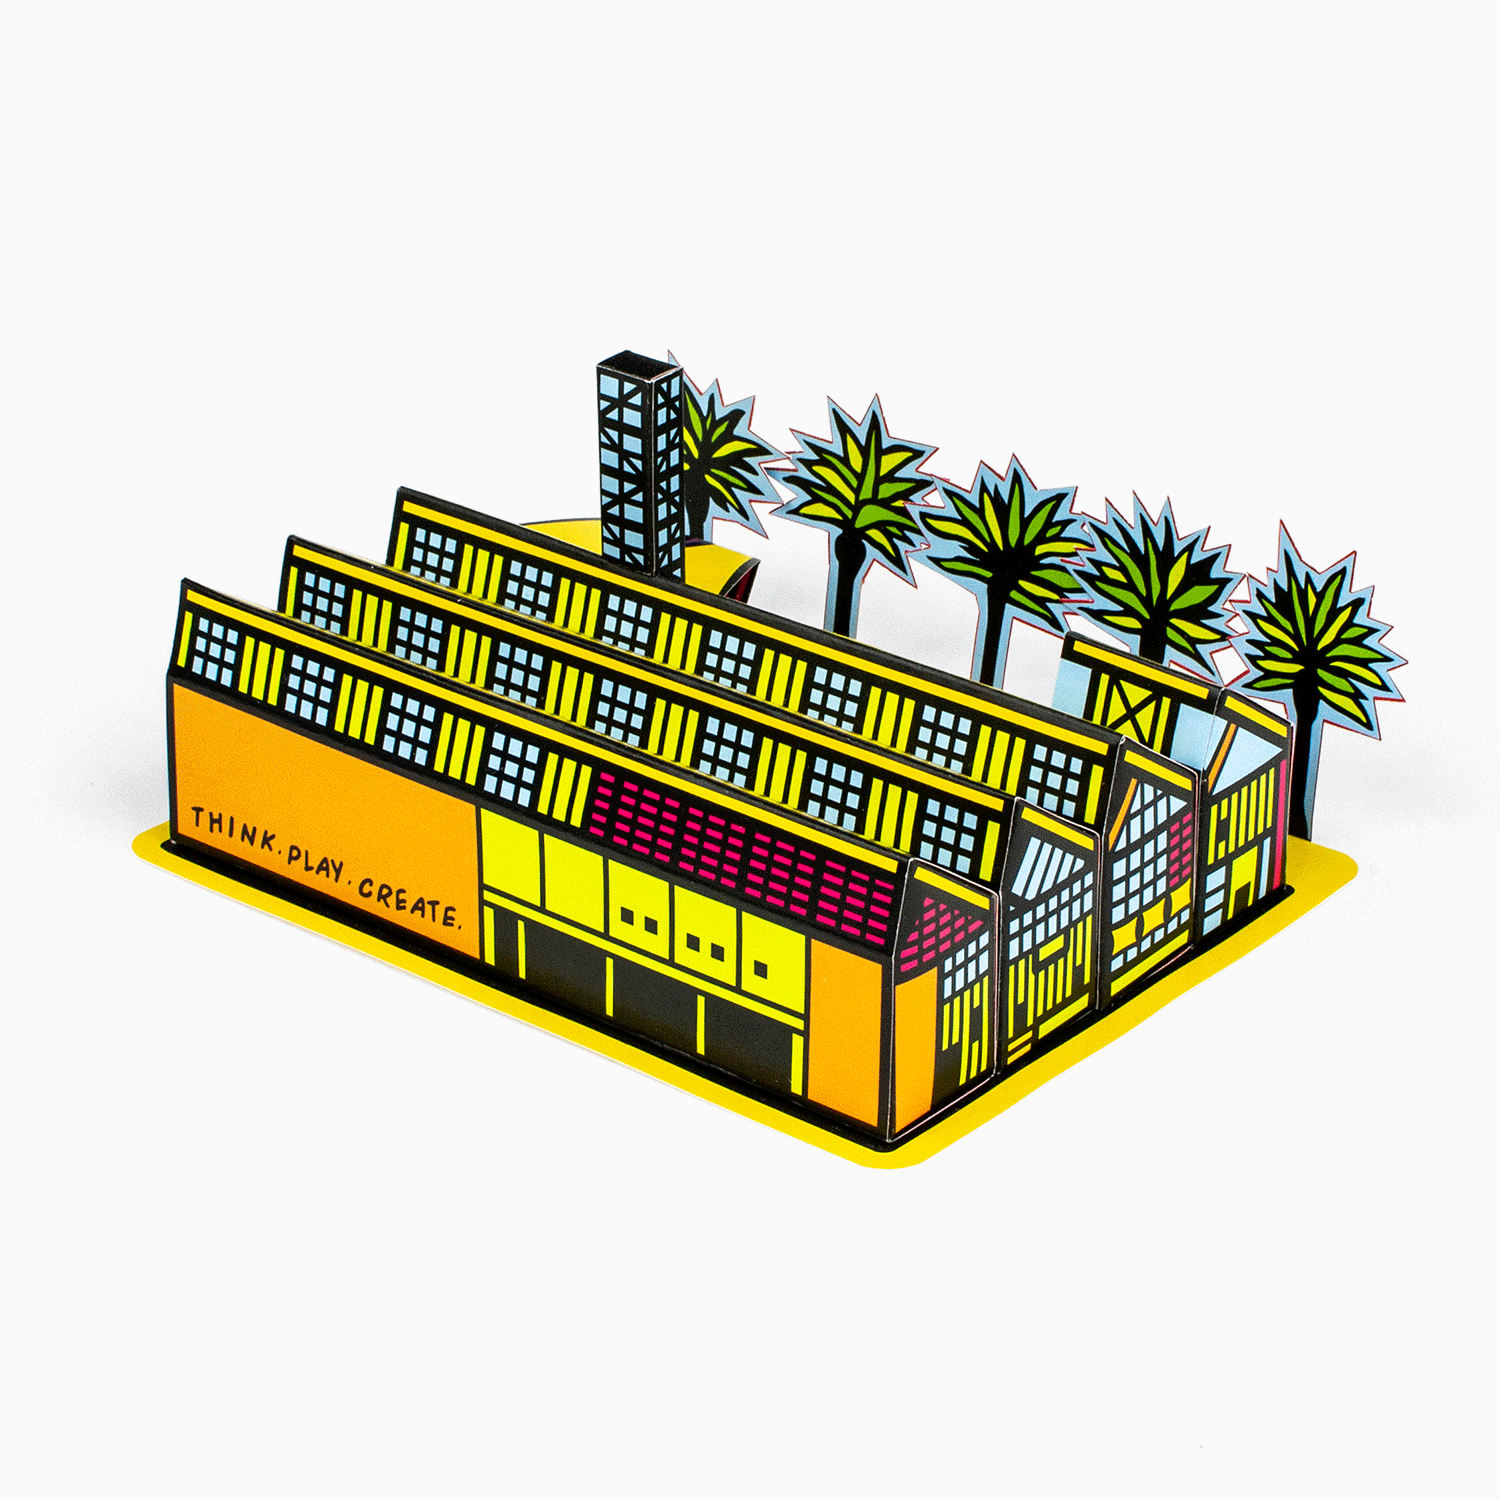 Foxetroo Cut-out Paper Model of The New Children's Museum in San Diego California